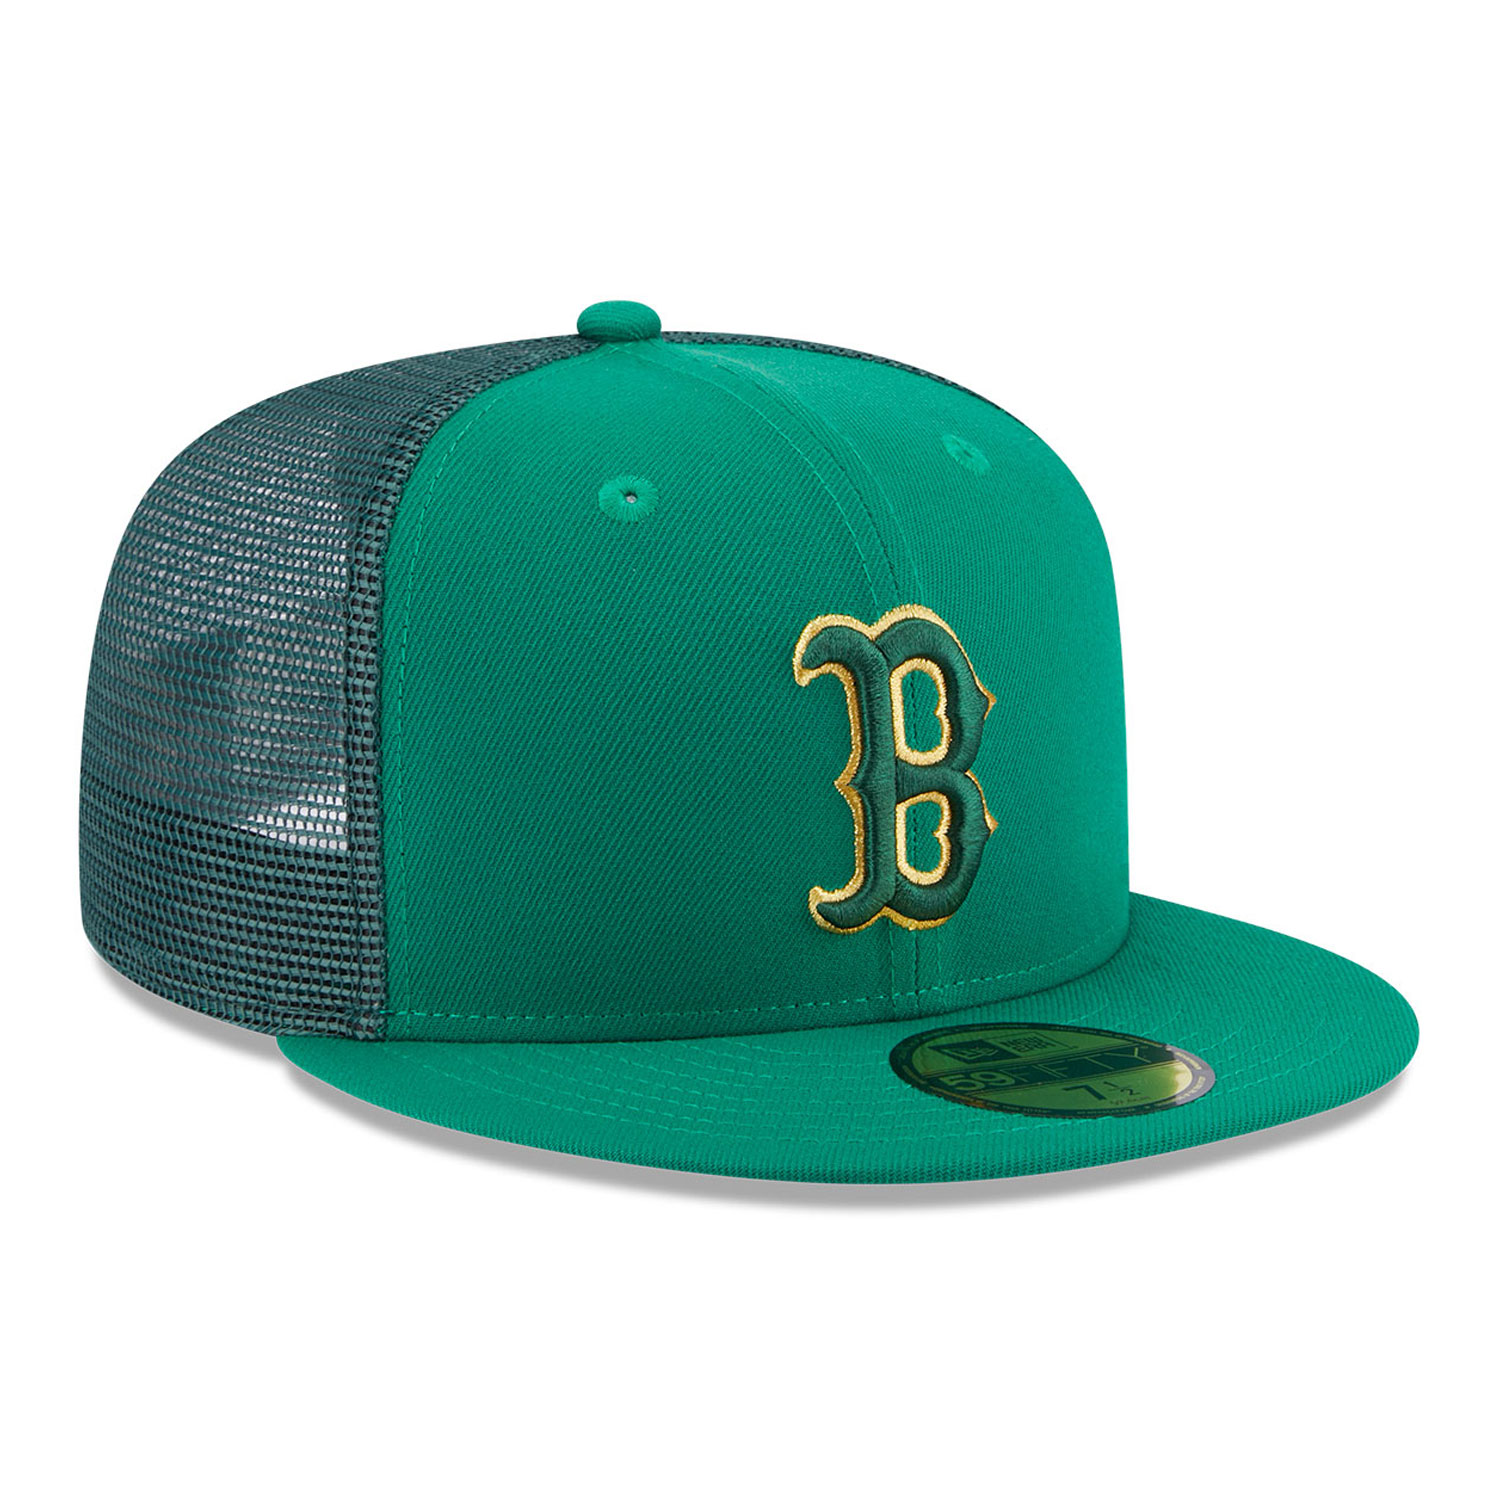 Official New Era MLB St Patricks Day Boston Red Sox 59FIFTY Fitted Cap  C2_372 C2_372